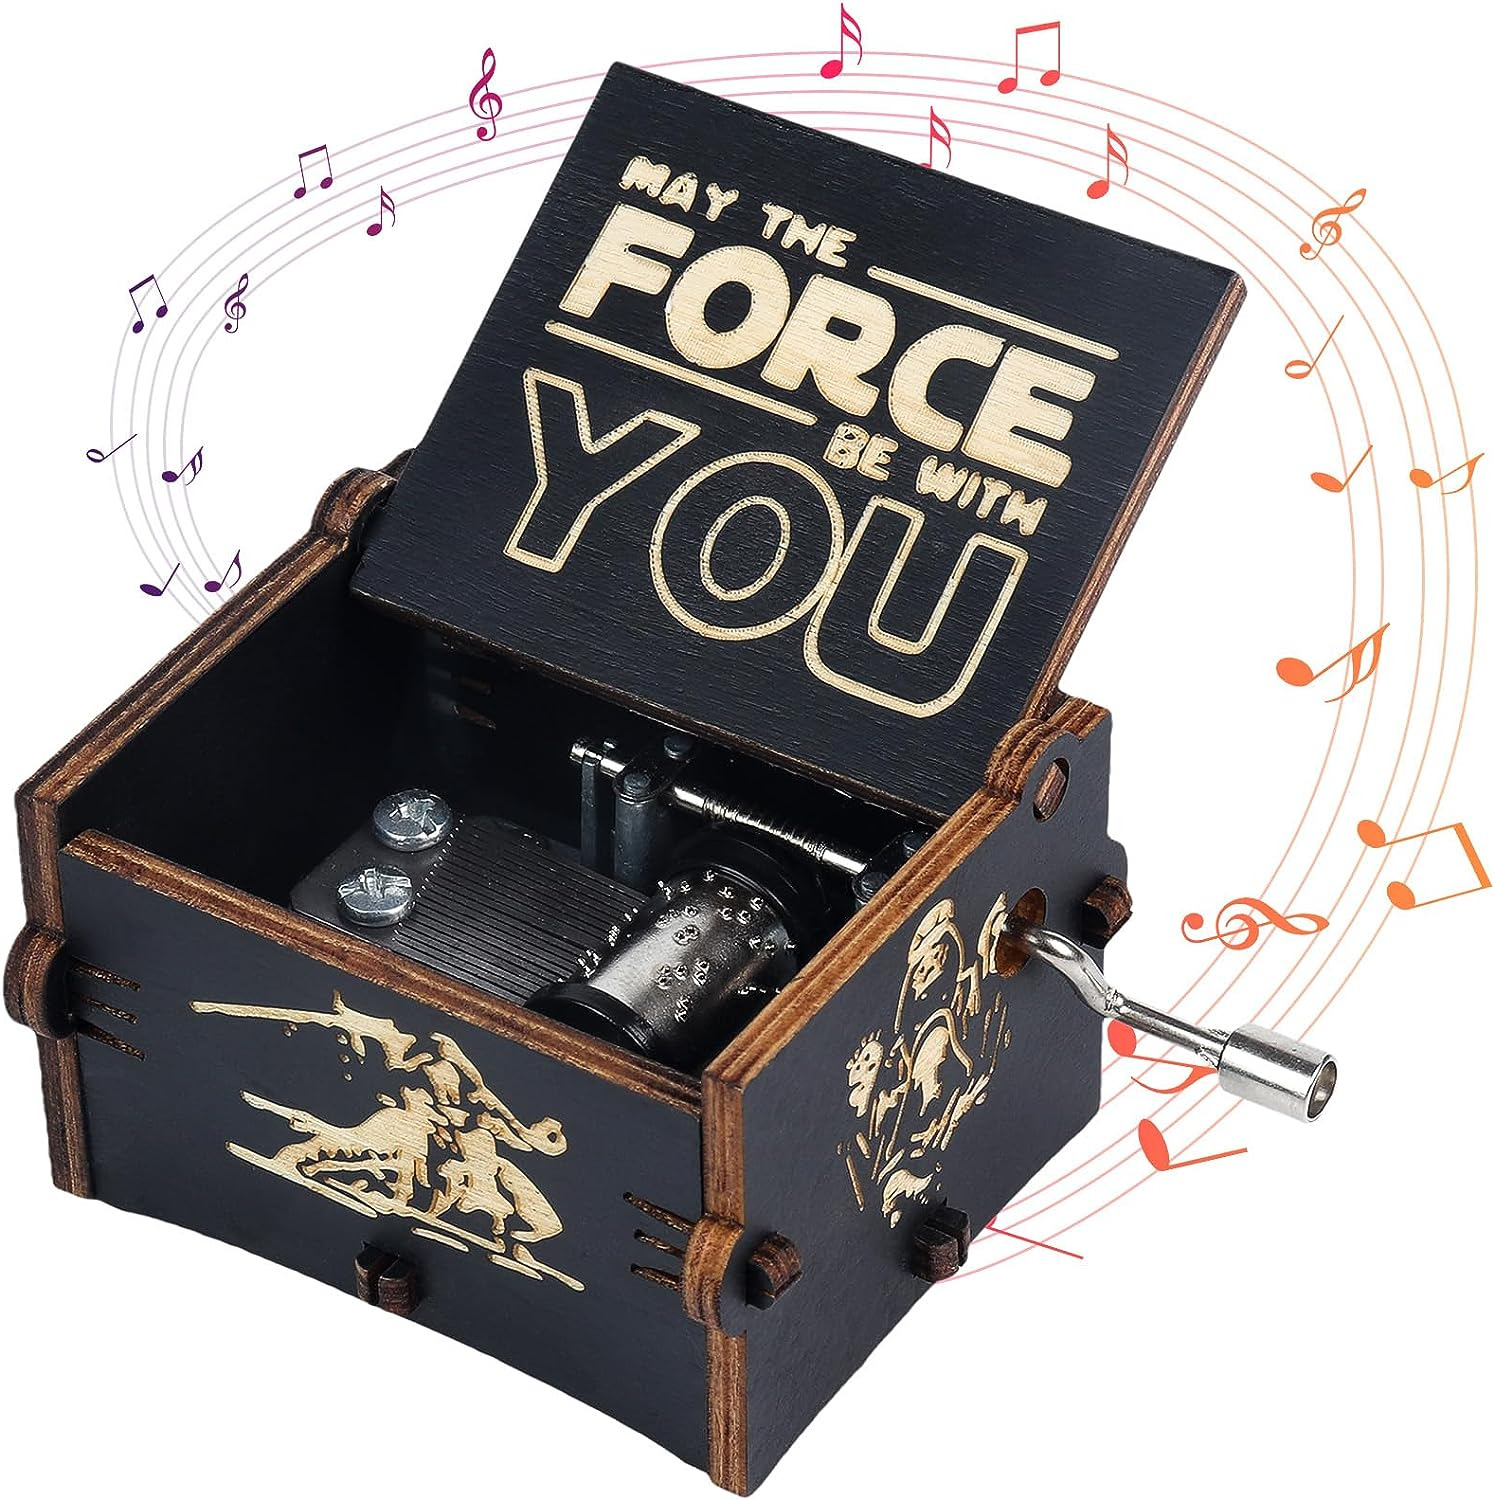 Star Wars Hand Cranked Music Box For Men Father's Day Bday Gifts Wooden Engraved